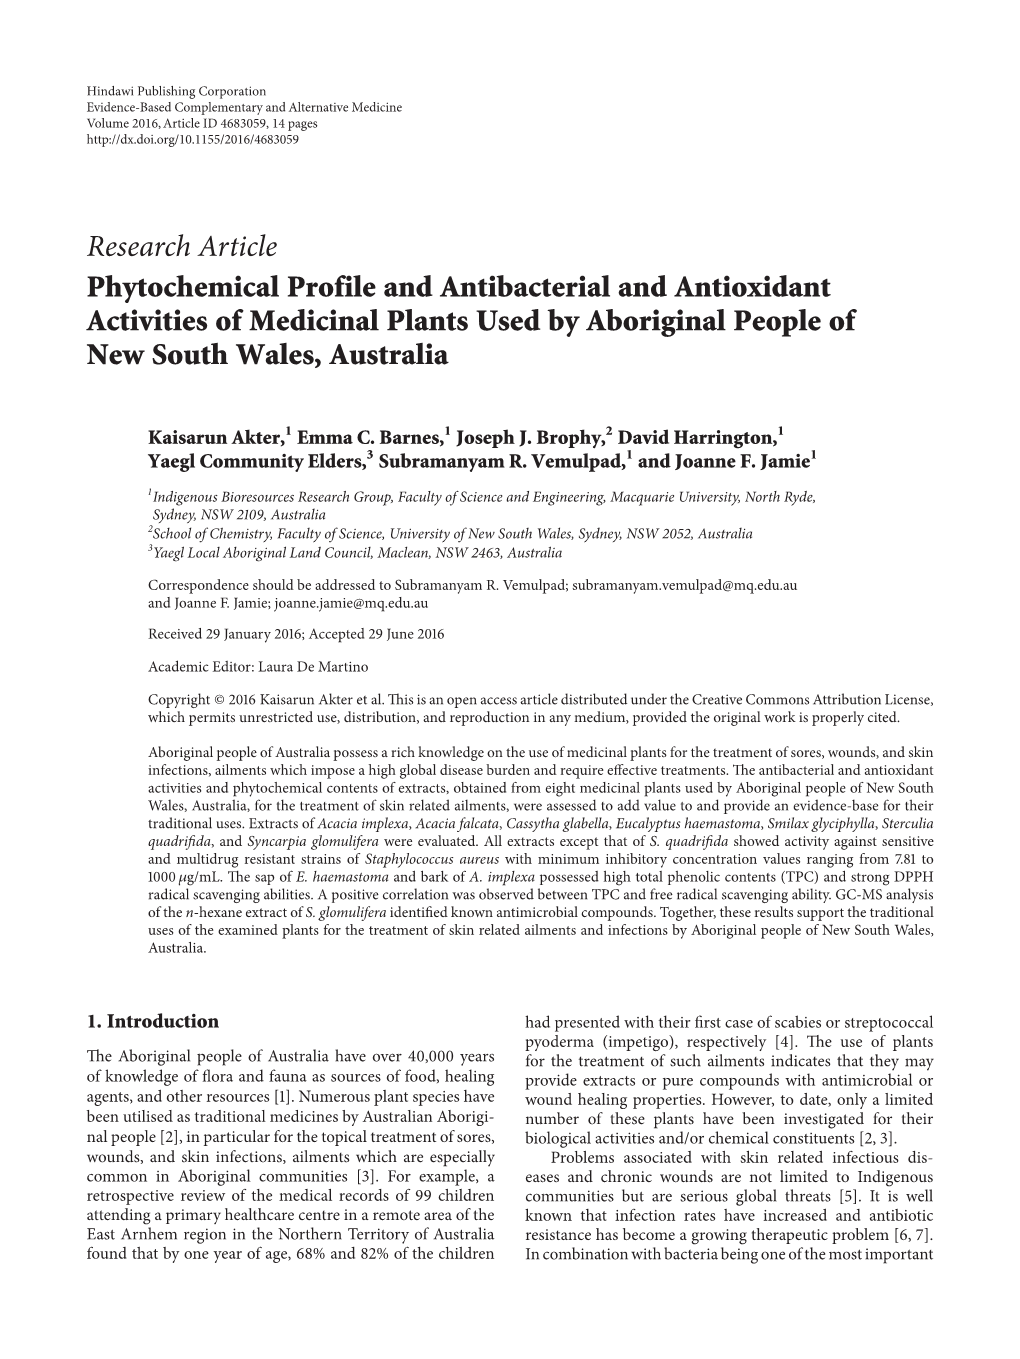 Phytochemical Profile and Antibacterial and Antioxidant Activities of Medicinal Plants Used by Aboriginal People of New South Wales, Australia